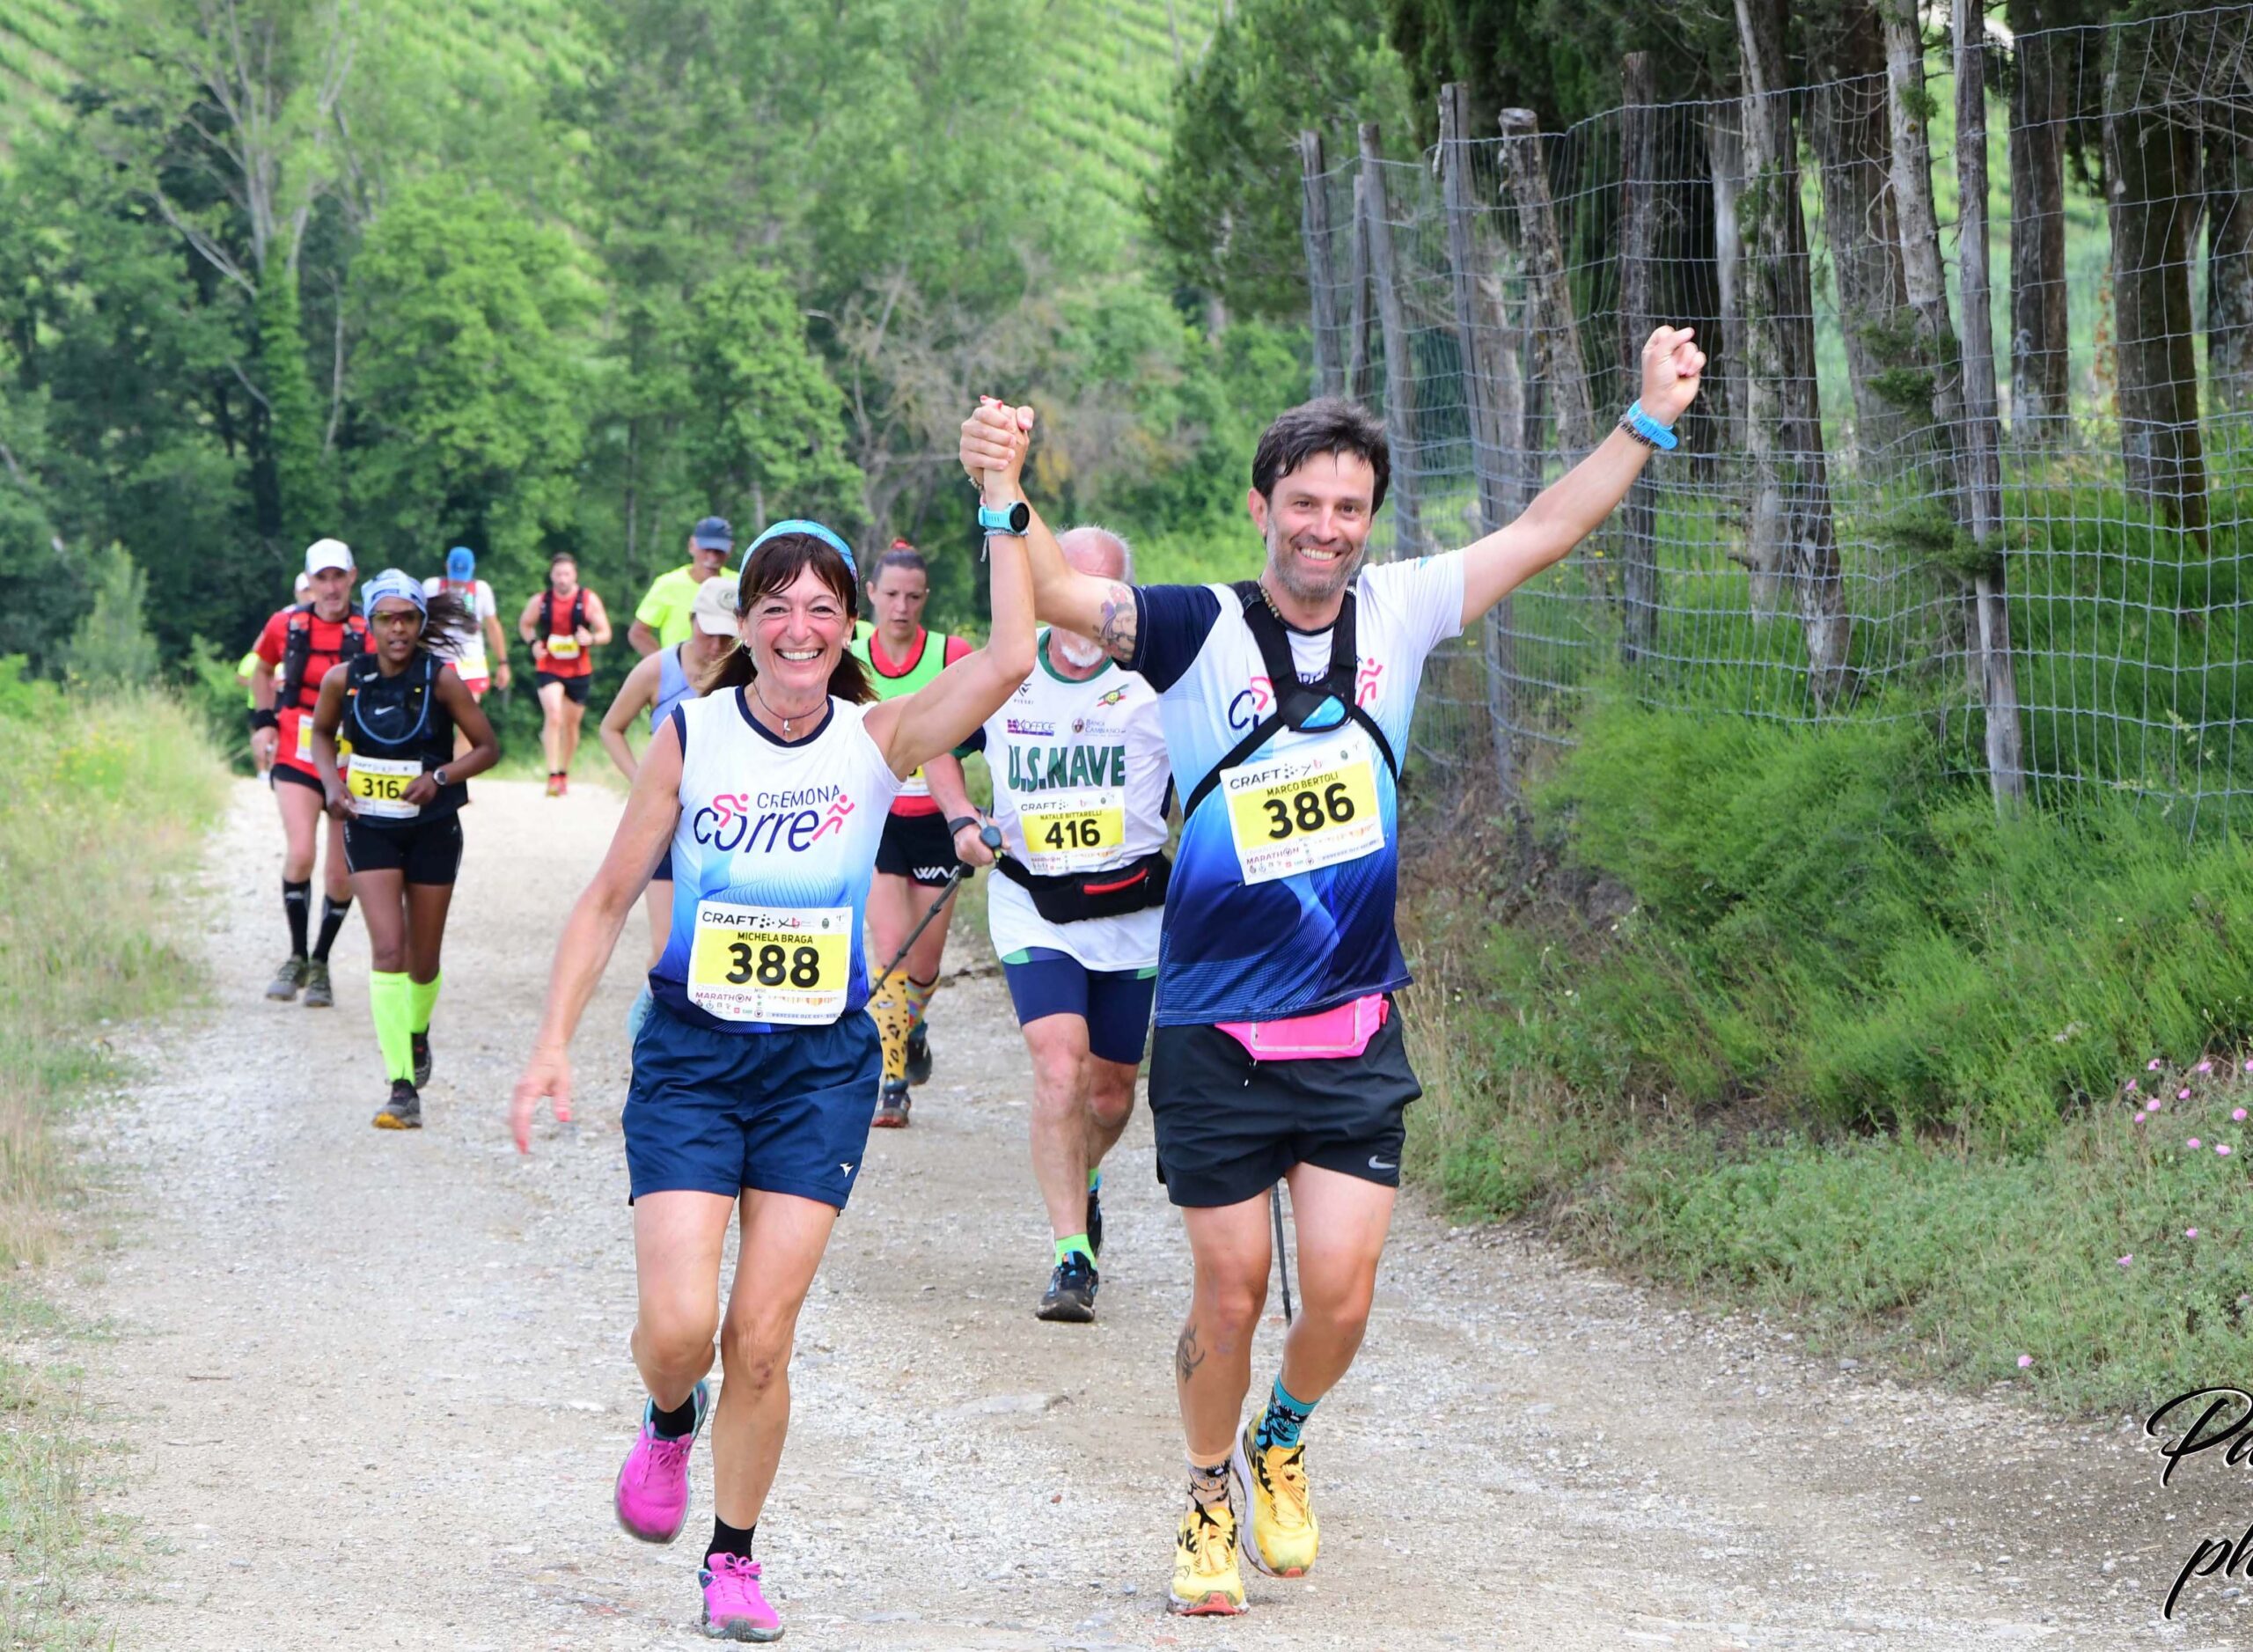 10% discount from February 13th to 15th for registrations in pairs at the Chianti Classico Marathon